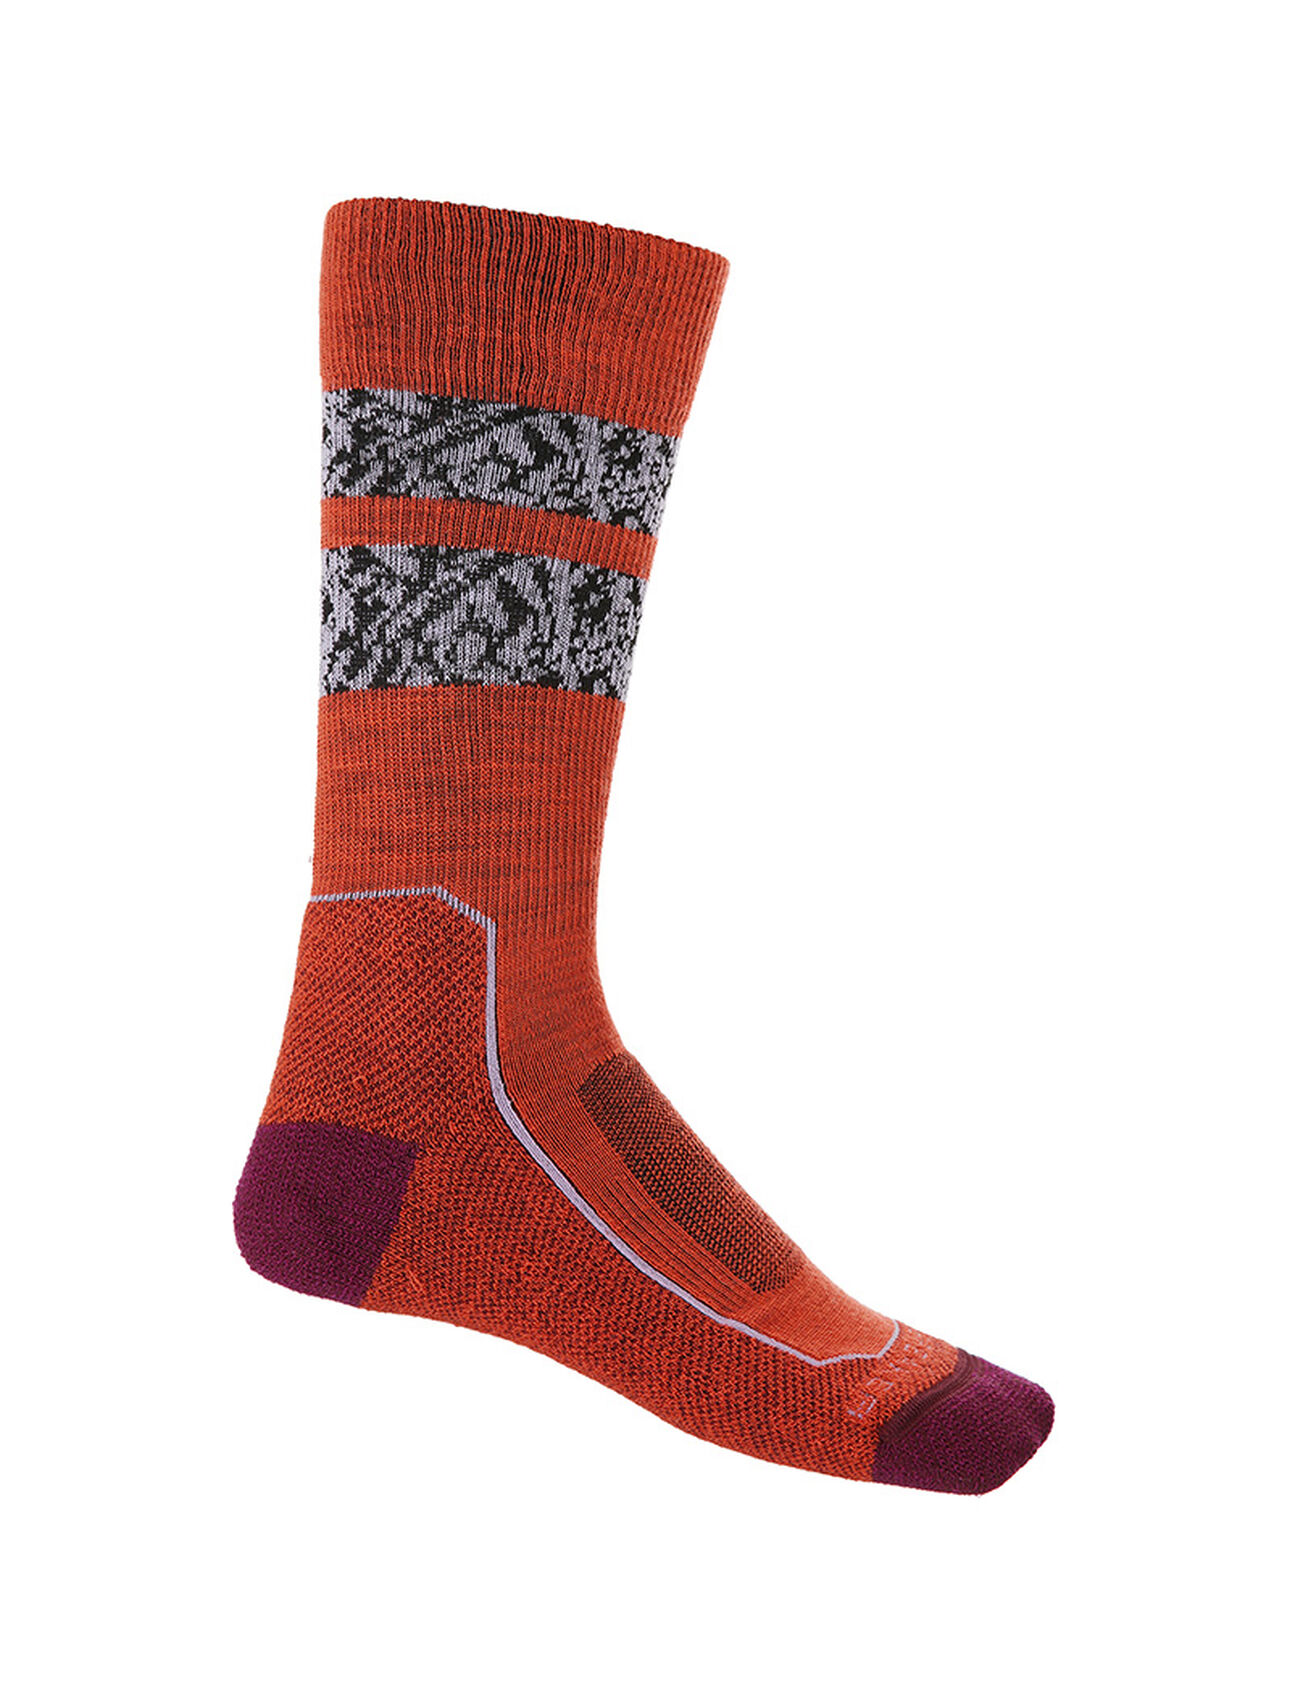 Womens Merino Hike+ Light Crew Socks Natural Summit Durable, crew-length merino socks that are stretchy and naturally odor-resistant with light cushion, the Hike+ Light Crew Natural Summit socks feature an anatomical sculpted design for added support on day hikes and backpacking  trips.